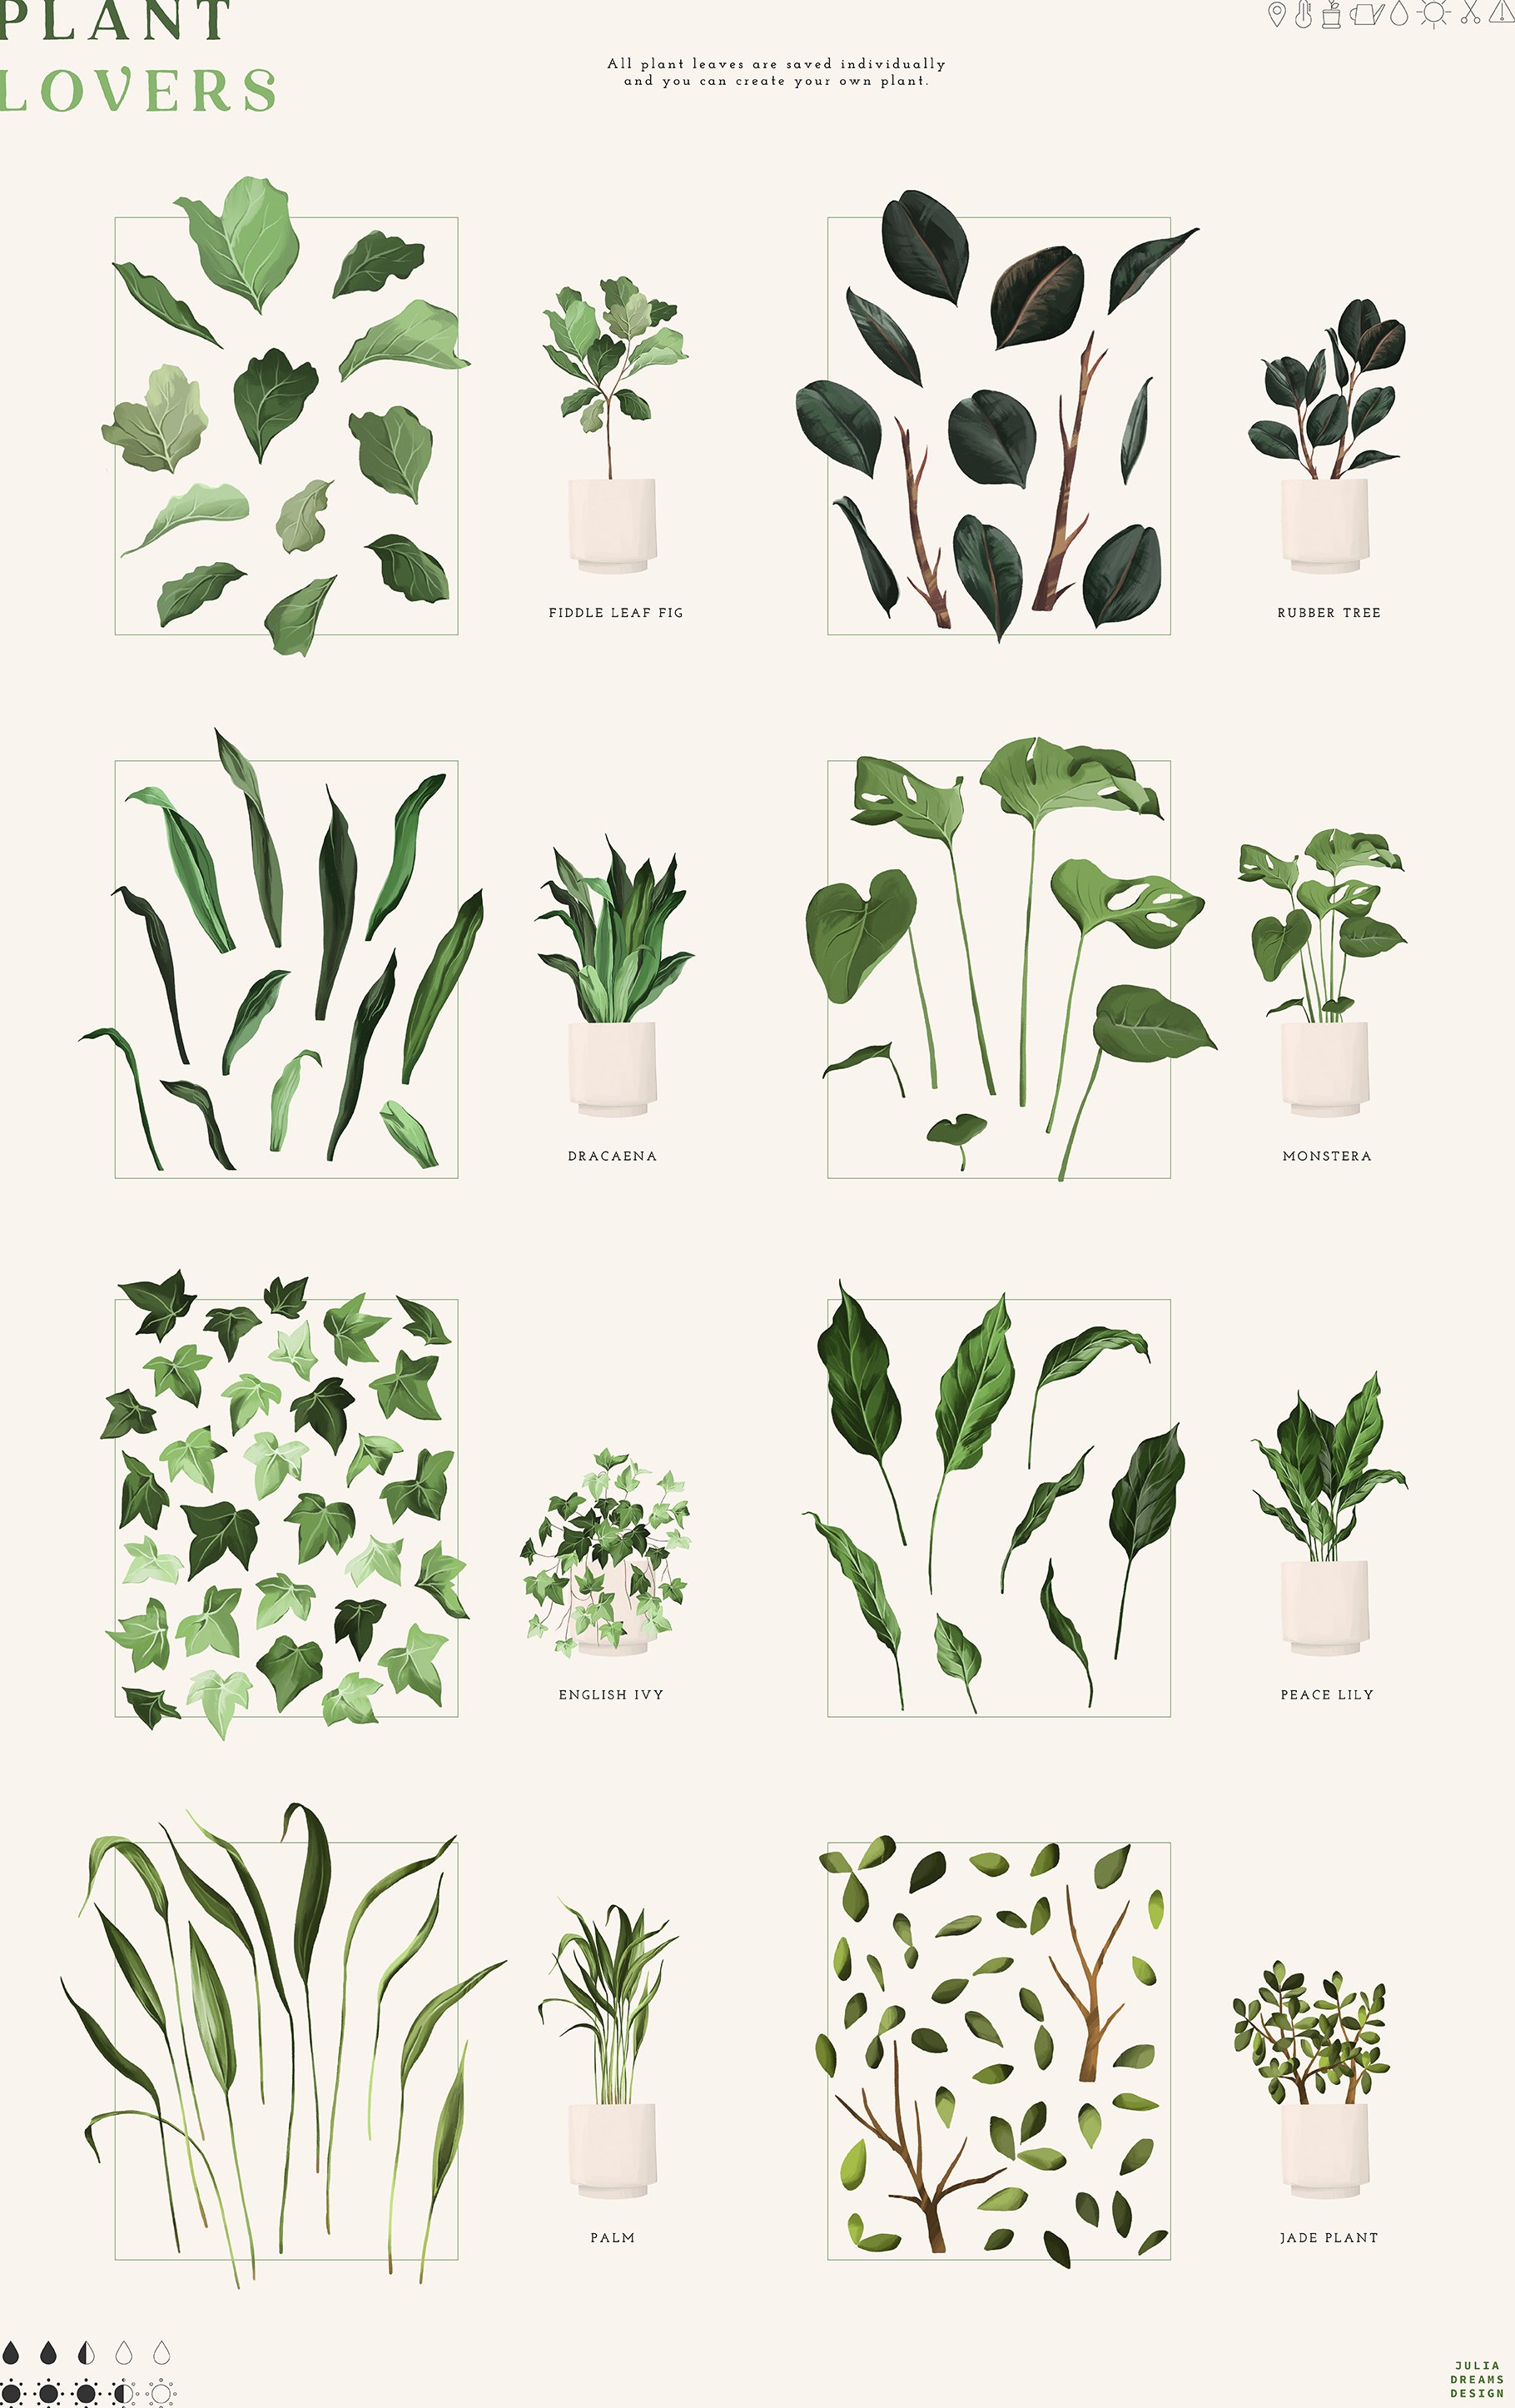 Cool plants collection.